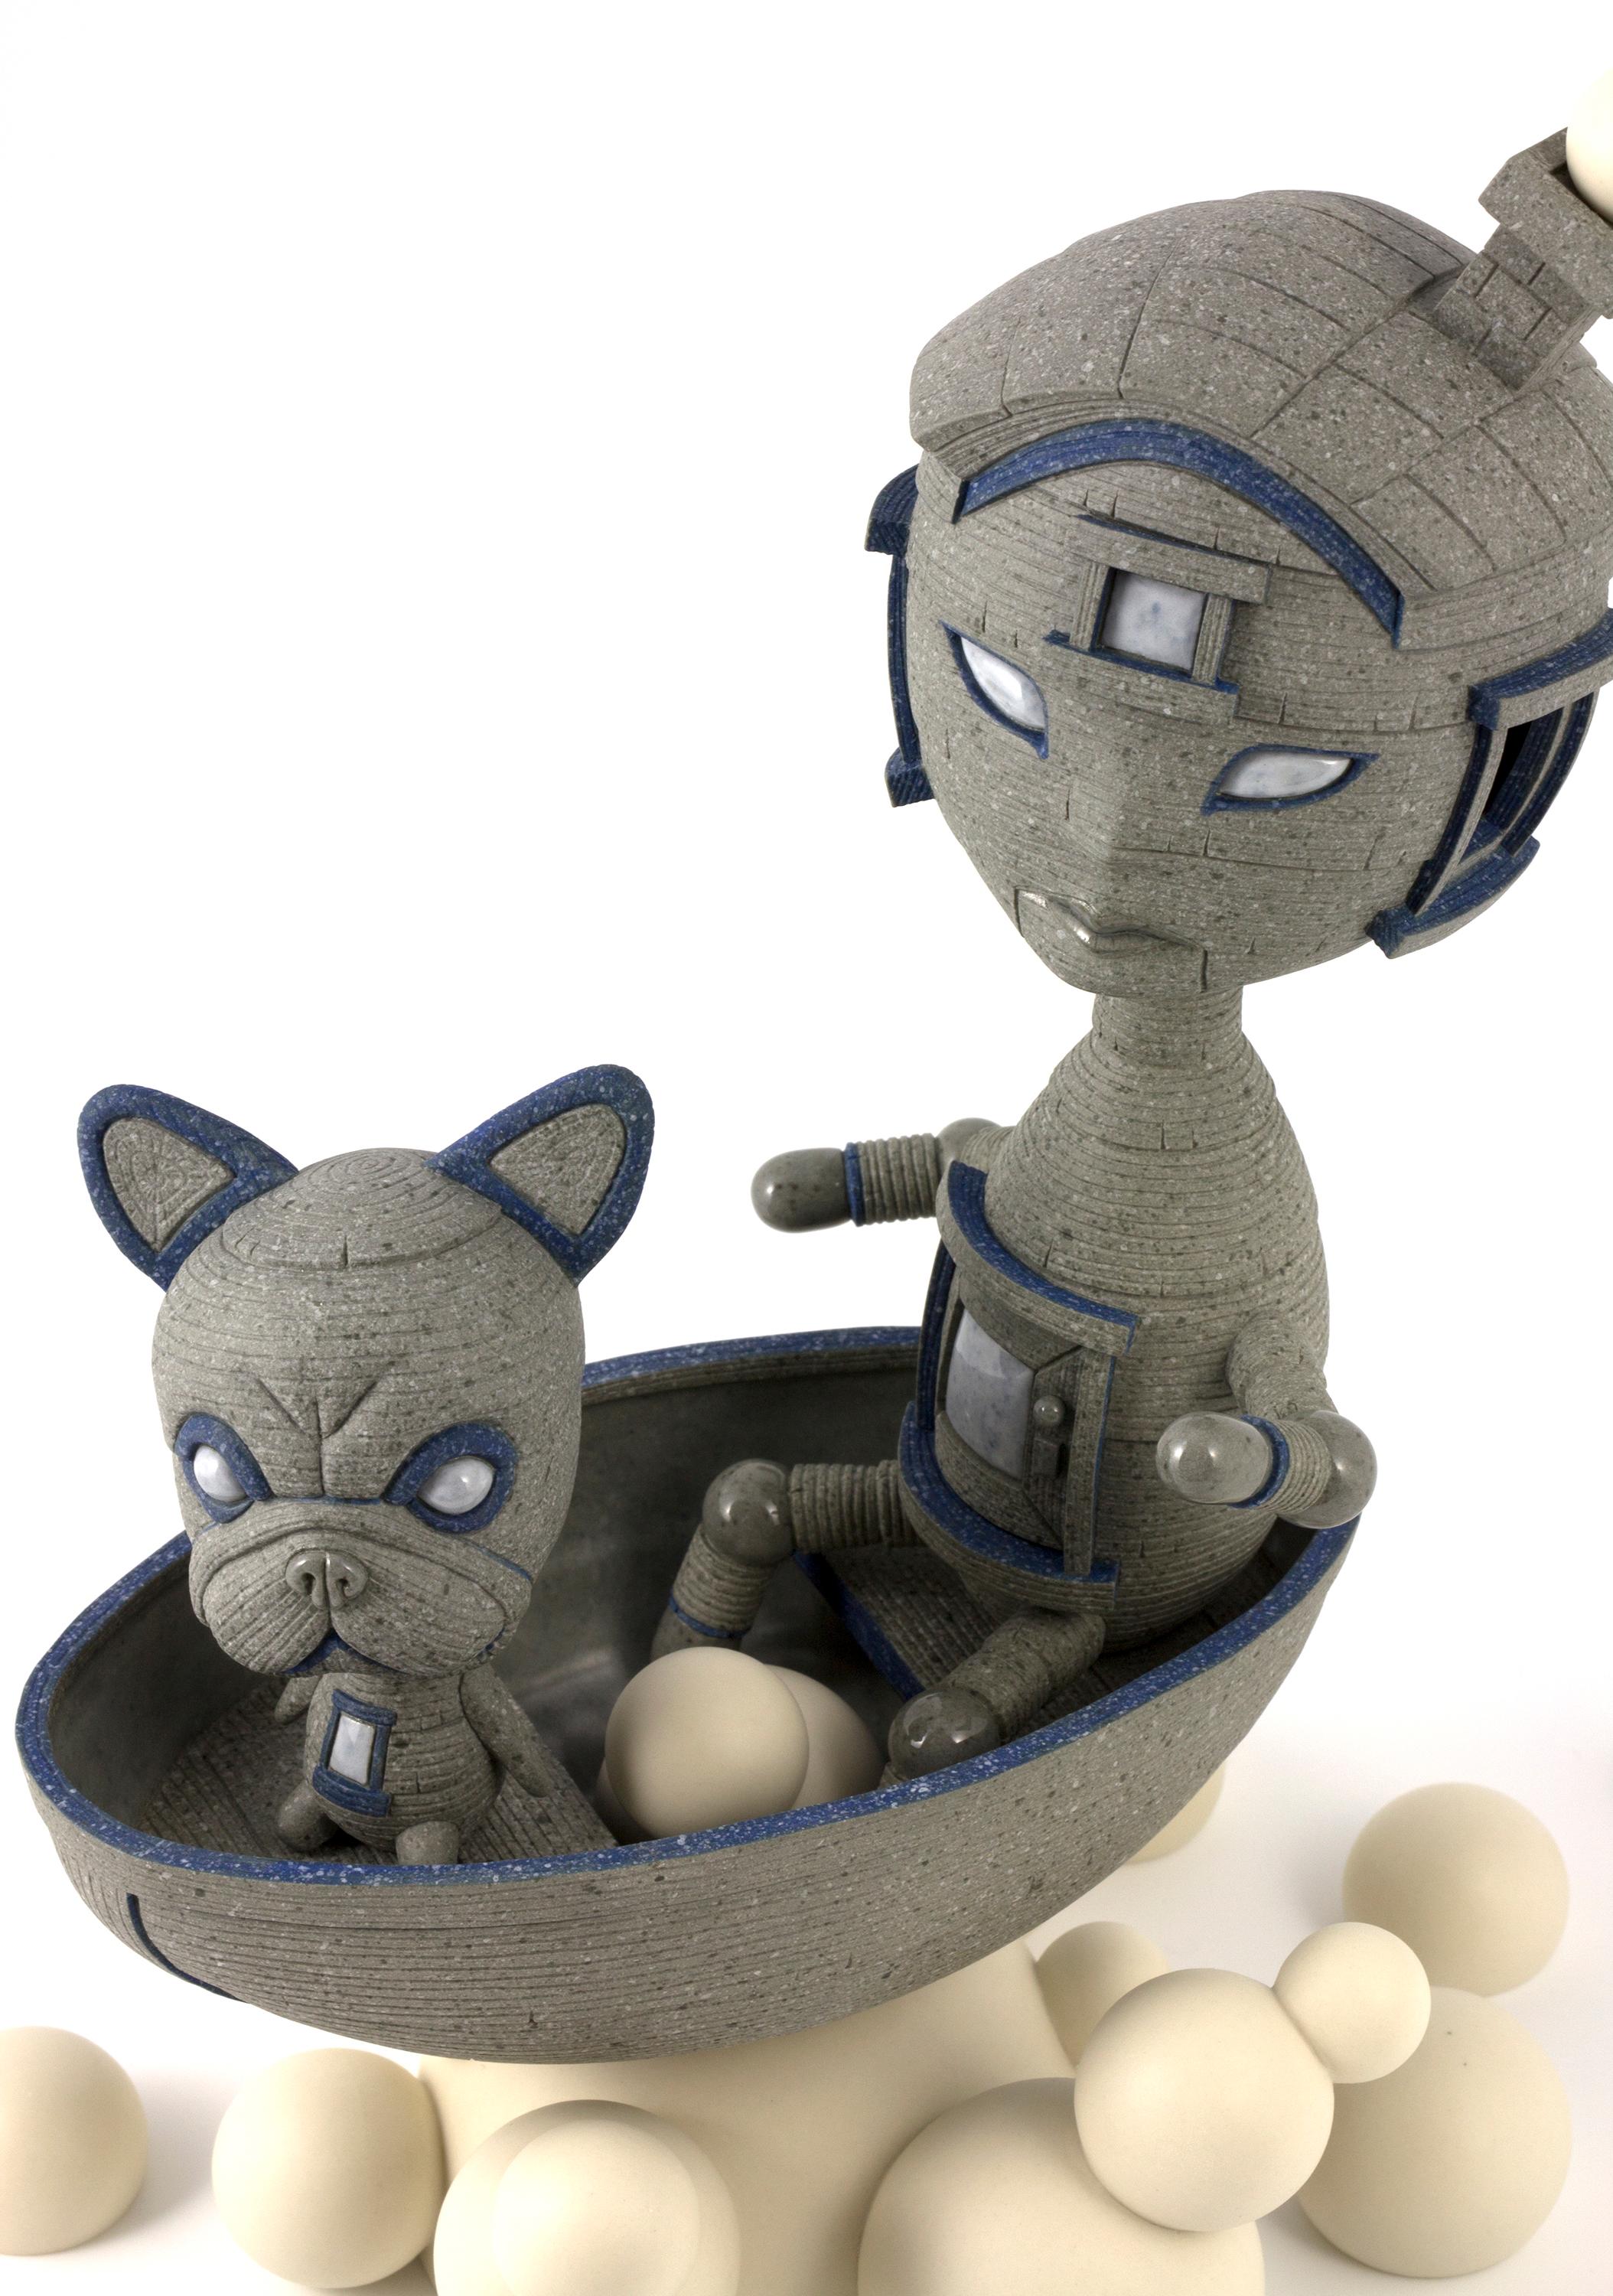 TAKE IT ON - surreal gray ceramic sculpture of boy and dog in boat - Sculpture by Calvin Ma